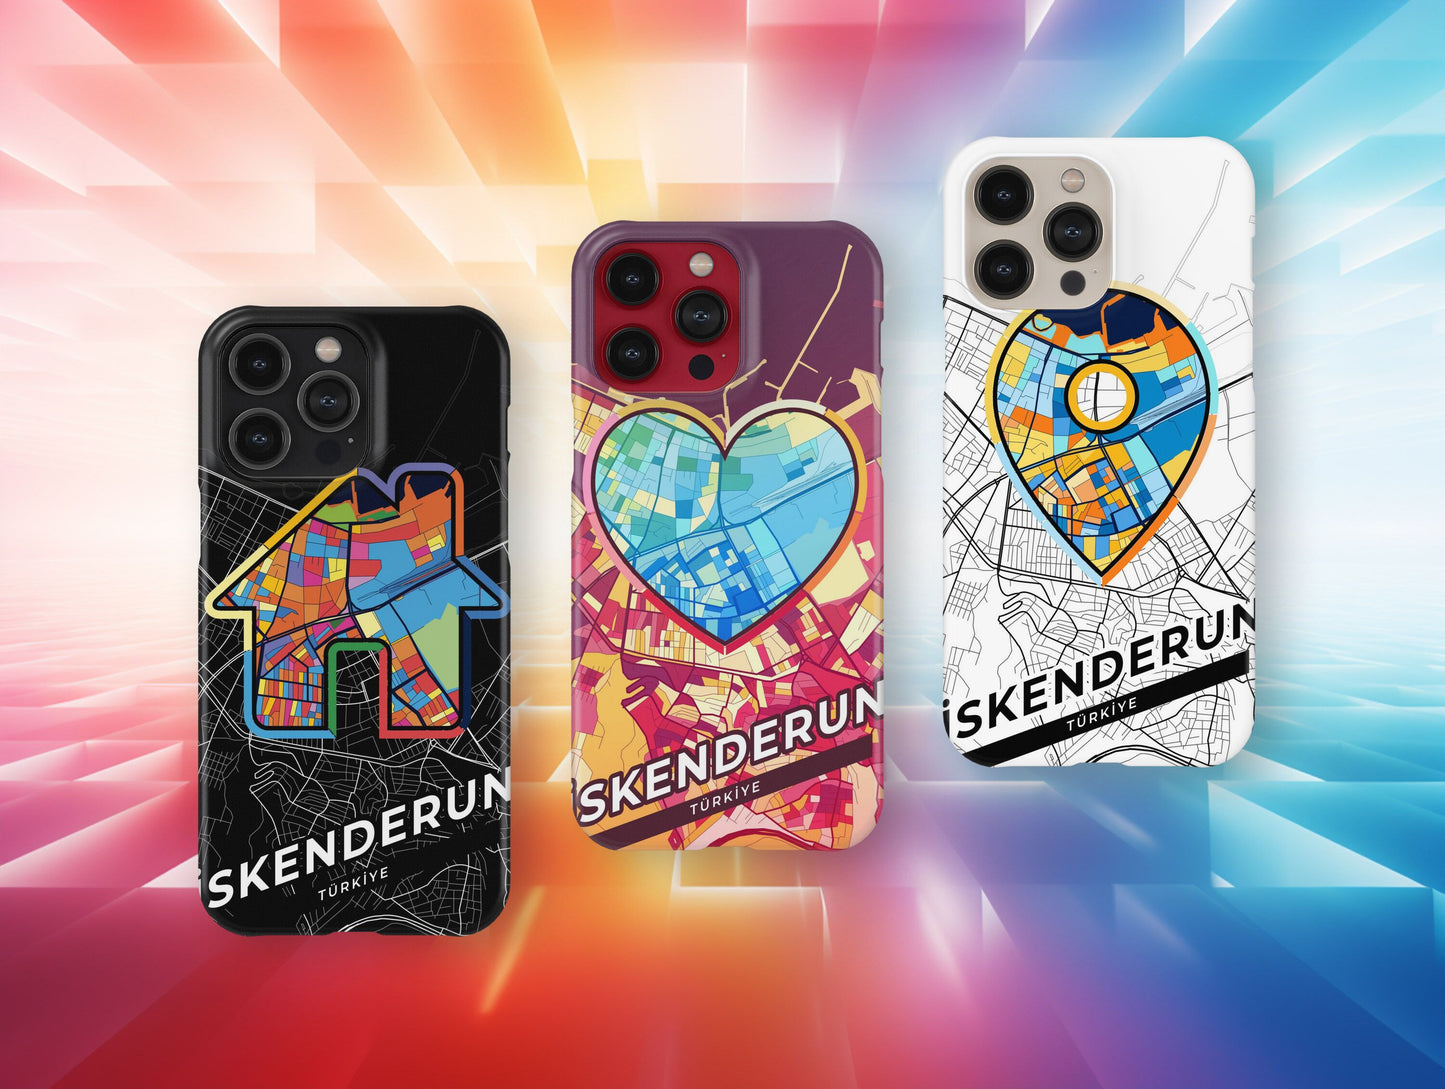 İskenderun Turkey slim phone case with colorful icon. Birthday, wedding or housewarming gift. Couple match cases.